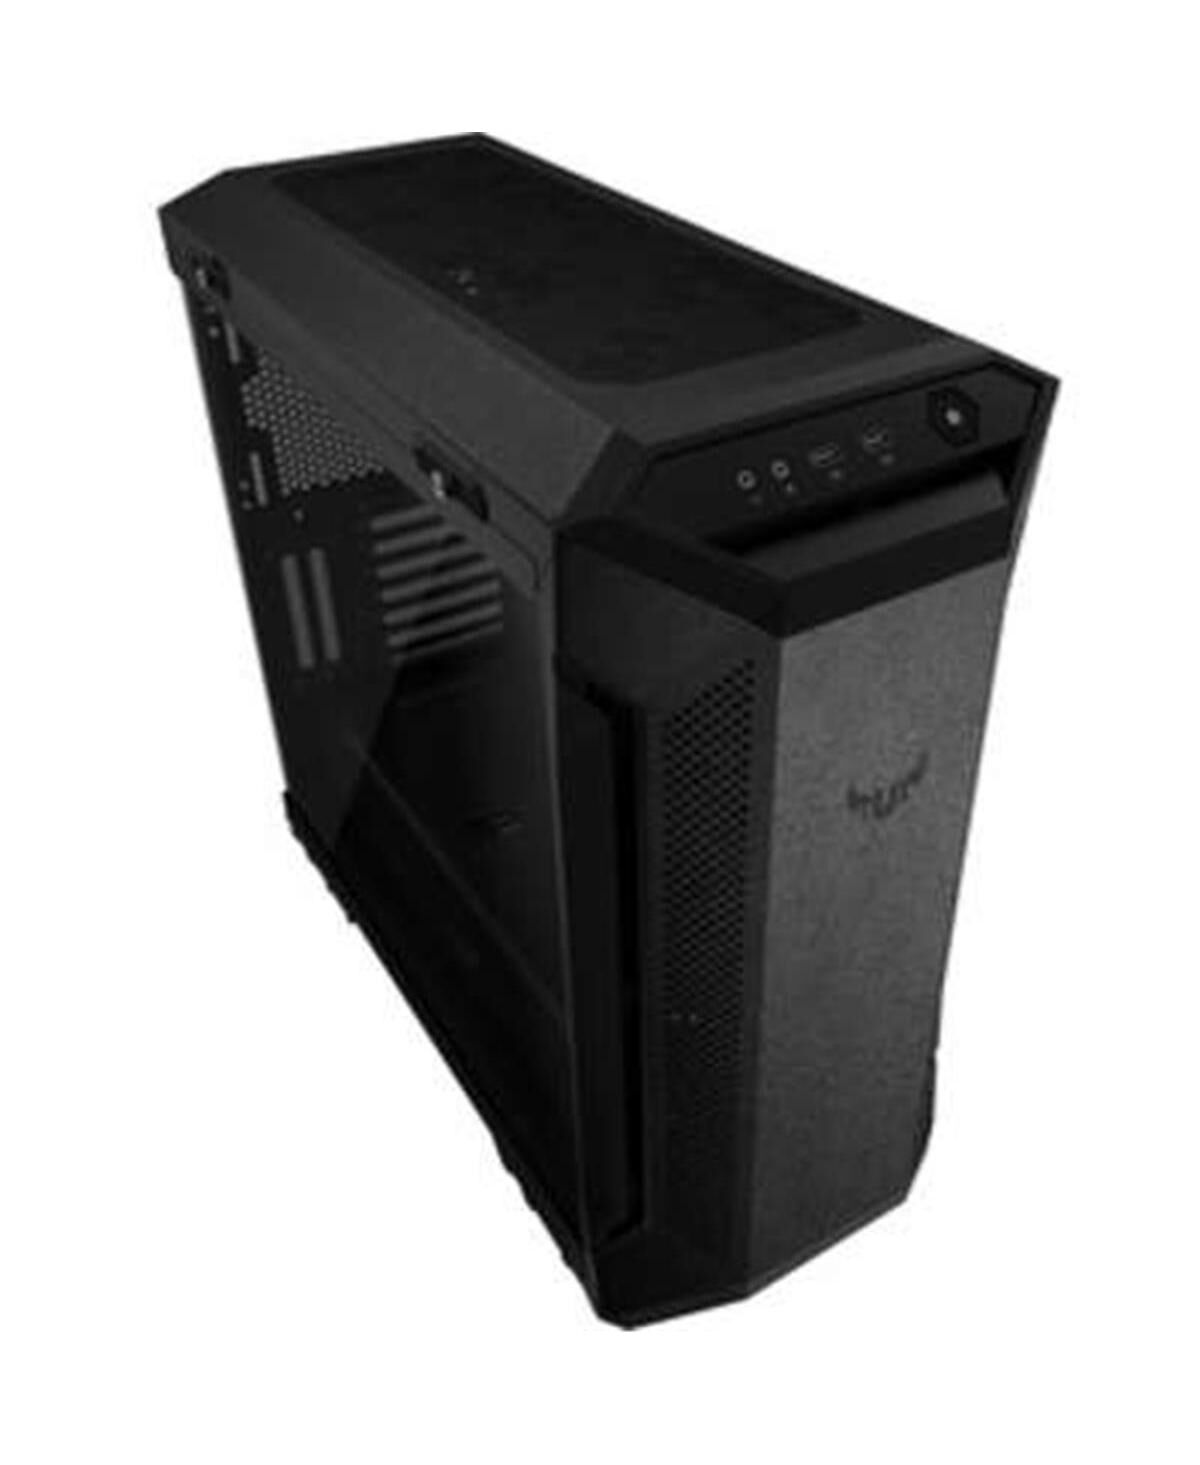 Asus 90DC0012-B40000 Tuf Gaming GT501 Case with Handle - Black